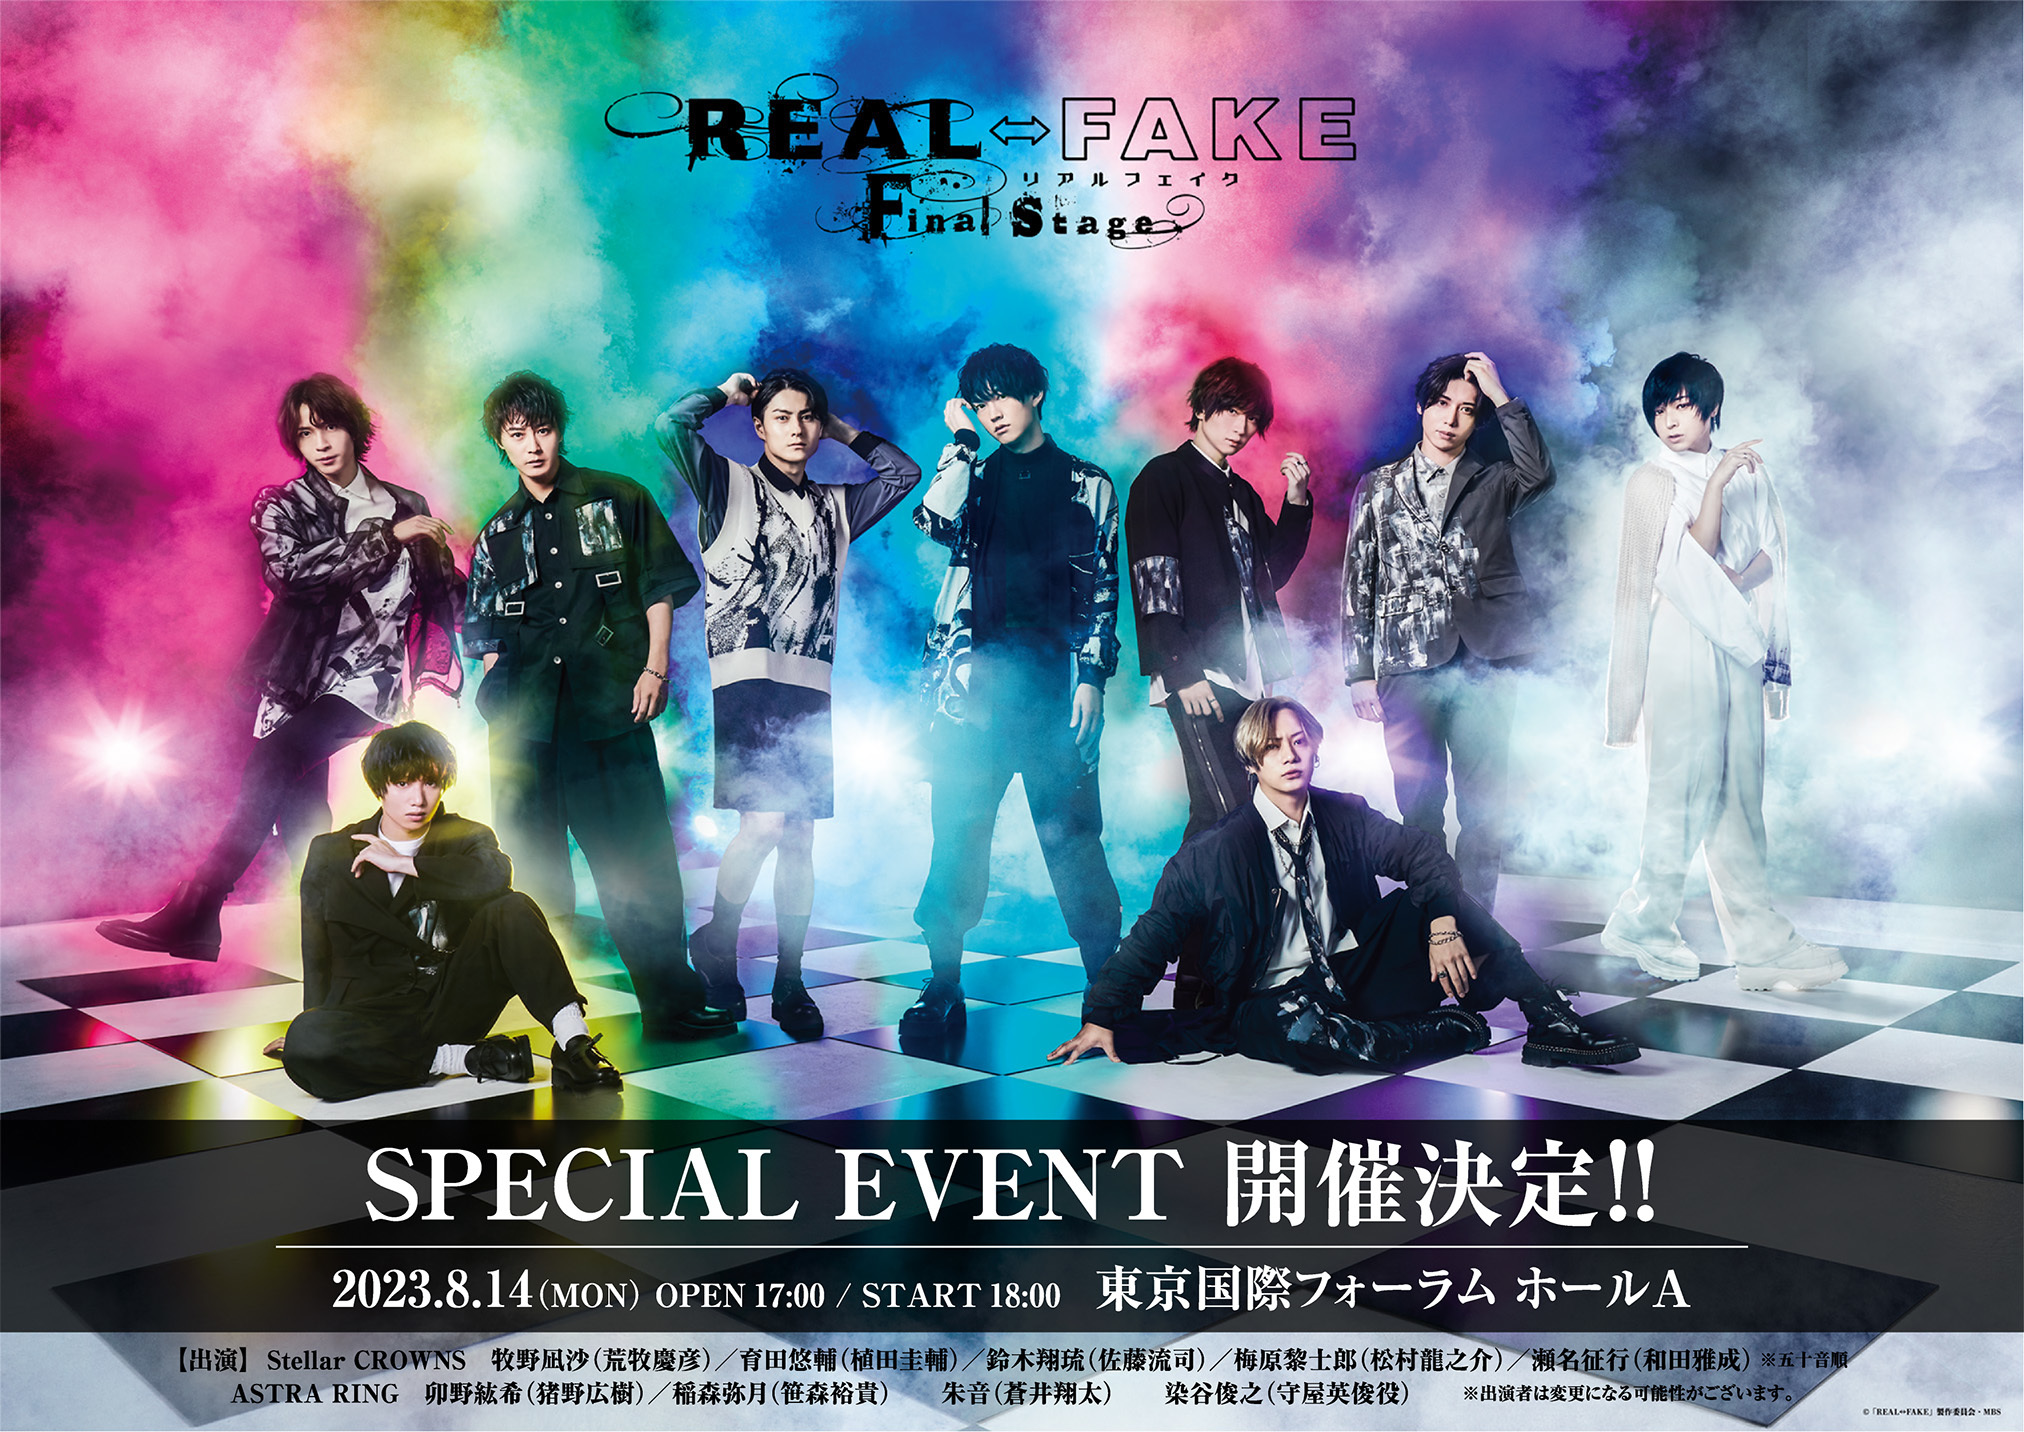 『REAL⇔FAKE Final Stage』SPECIAL EVENT